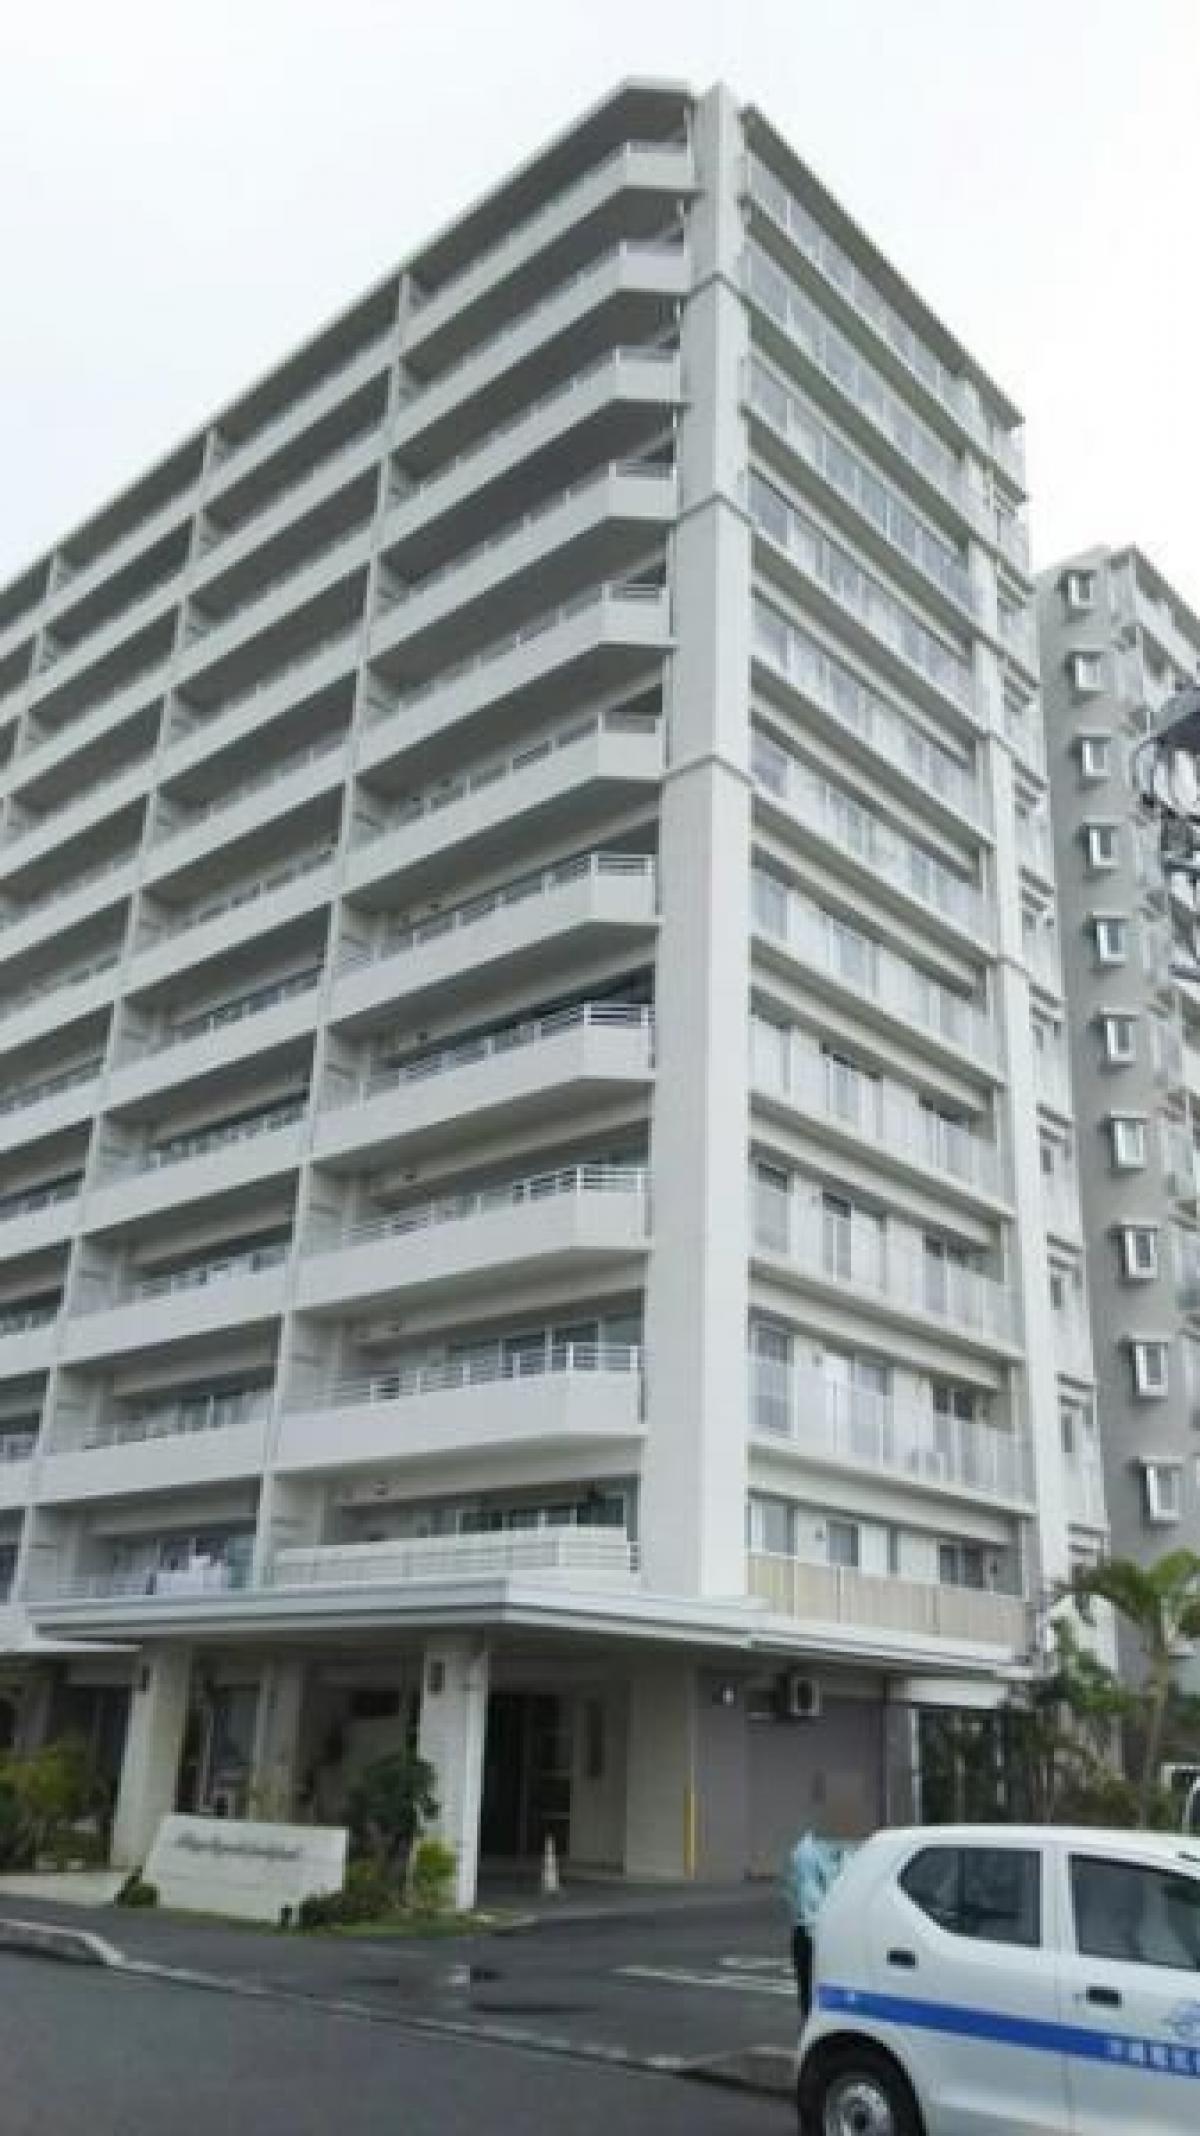 Picture of Apartment For Sale in Tomigusuku Shi, Okinawa, Japan